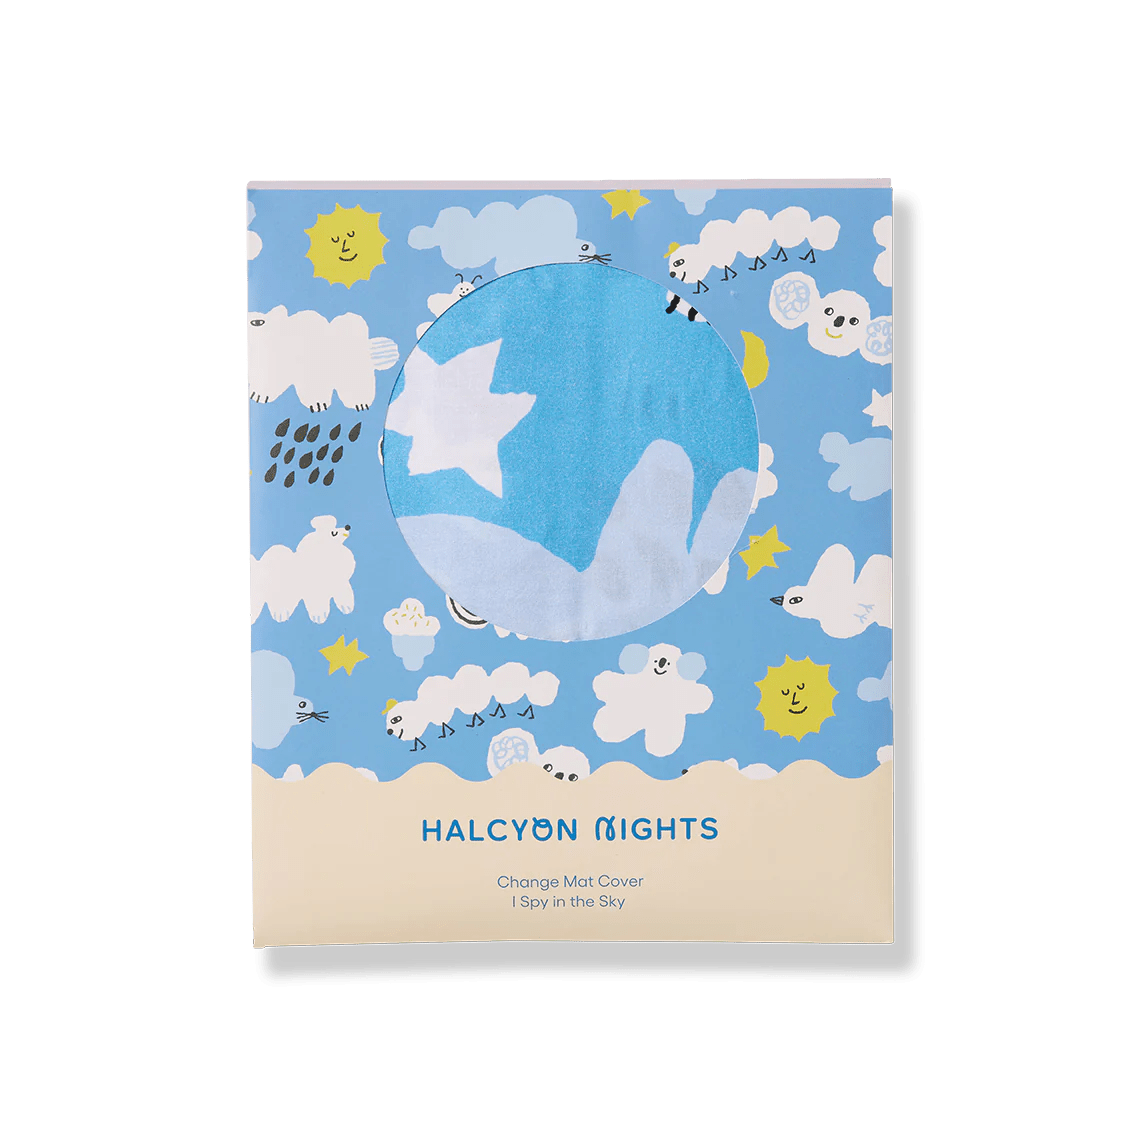 HALCYON NIGHTS I Spy In The Sky Change Mat Cover - Preston Apothecary